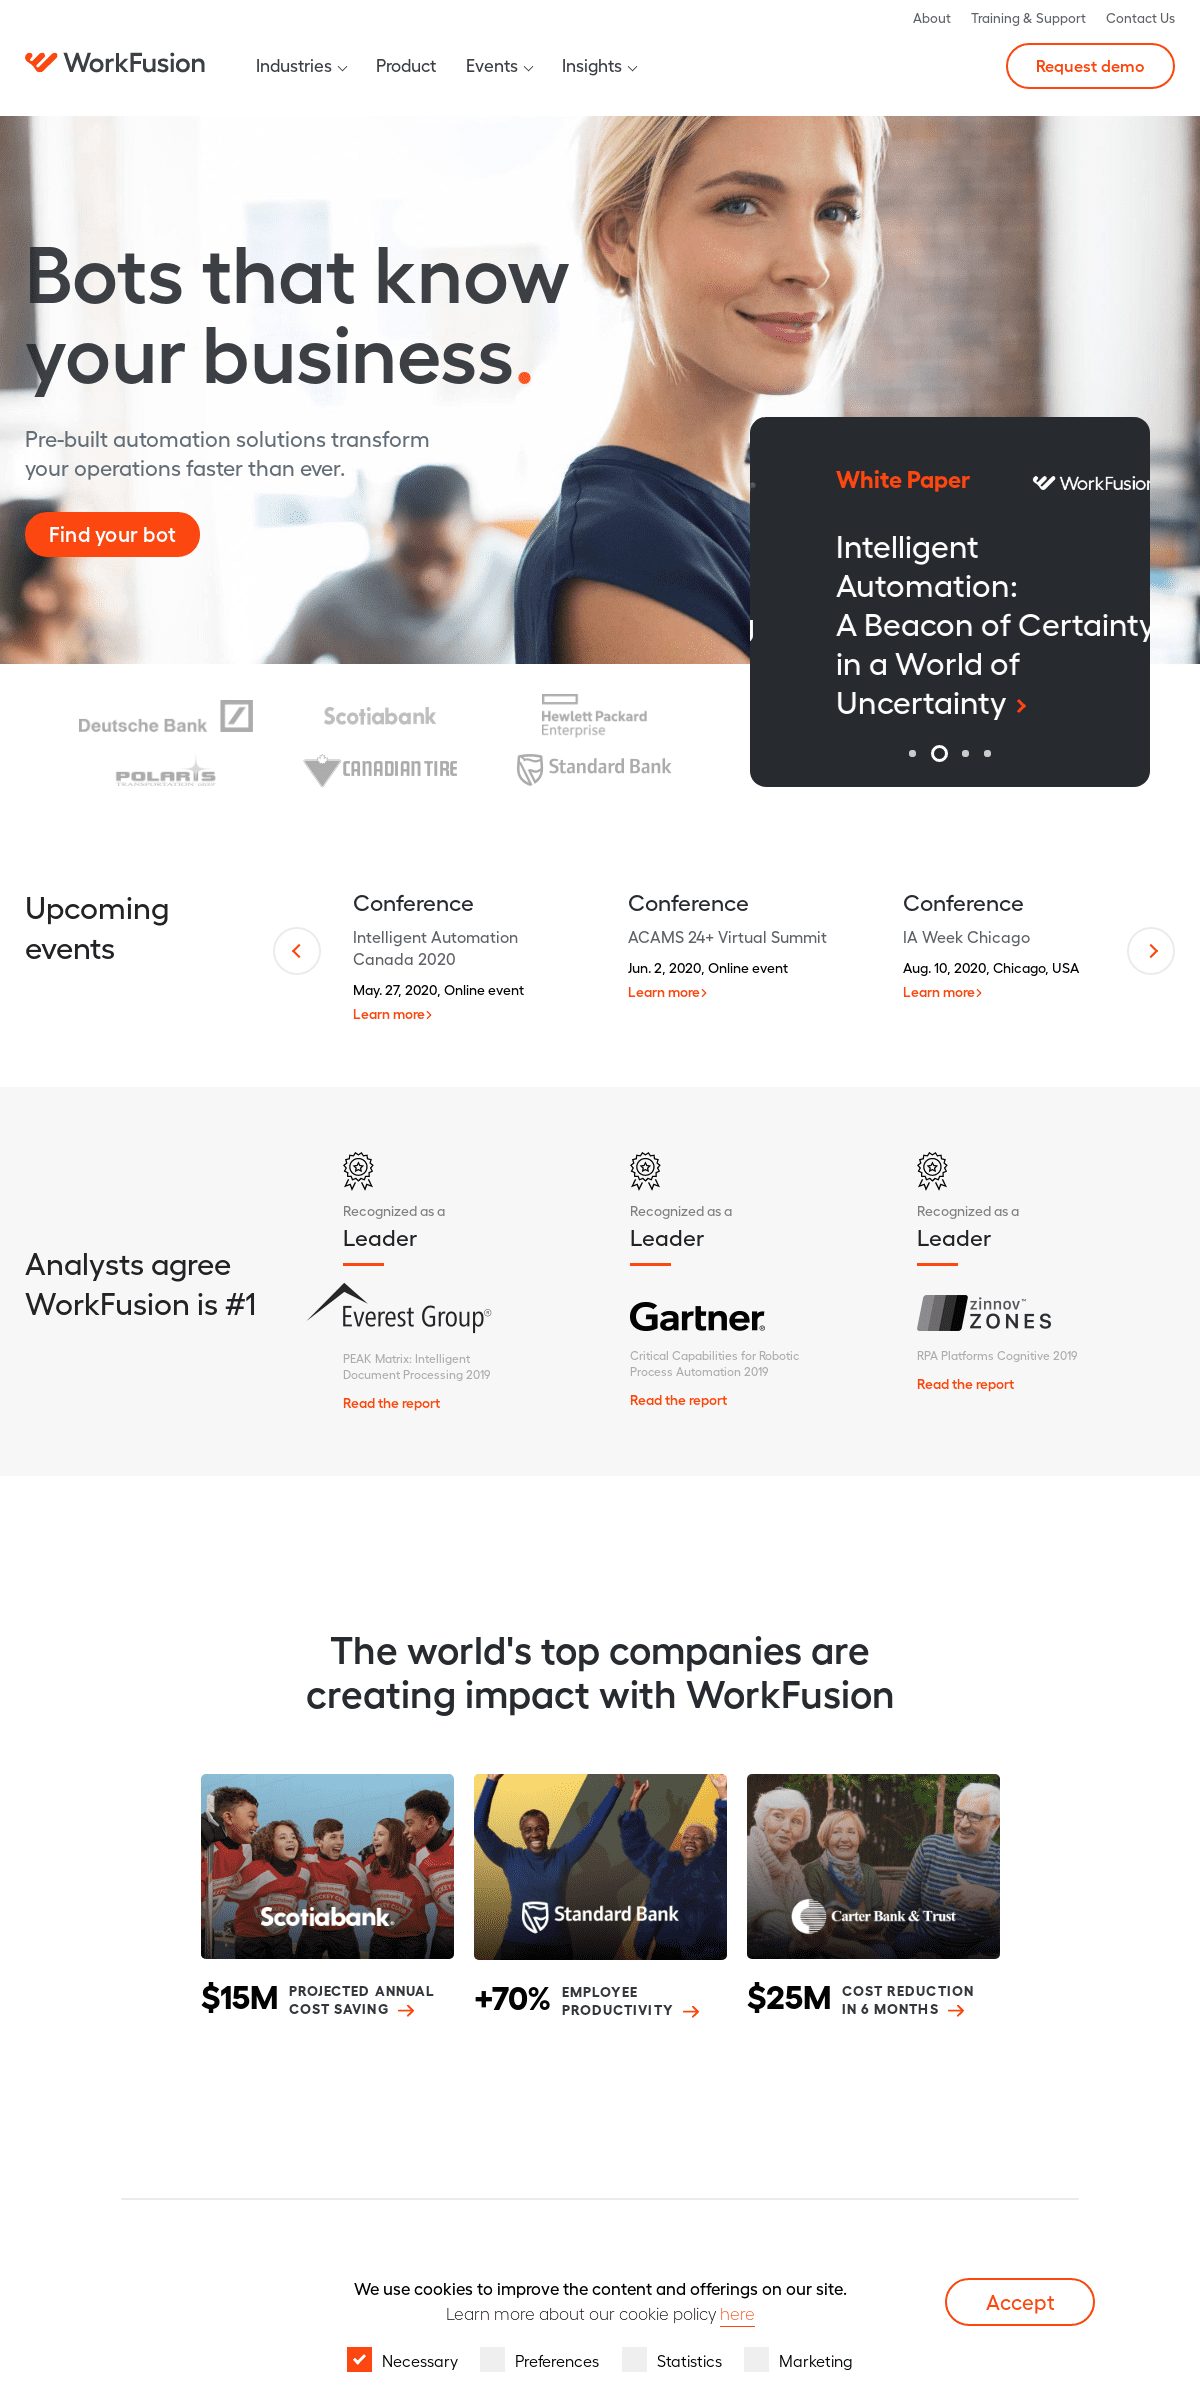 A complete backup of workfusion.com